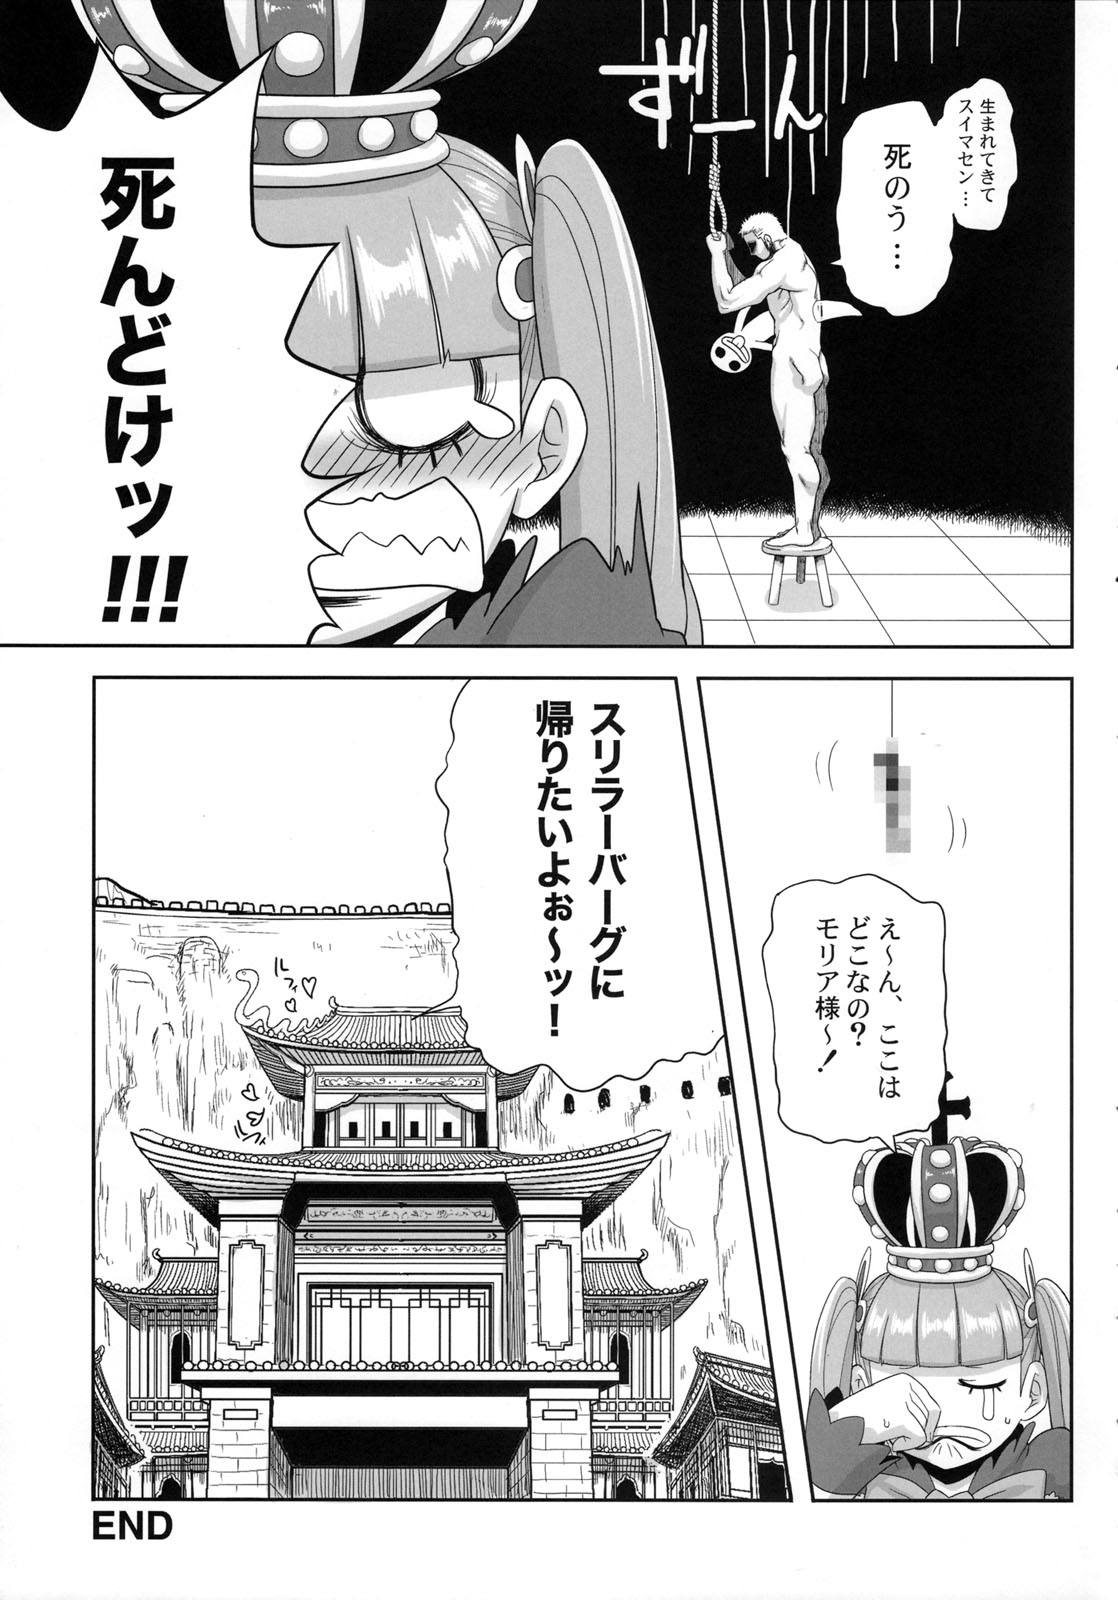 (C76) [Rojiura Jack (Jun)] THROUGH THE WALL (One Piece) page 25 full